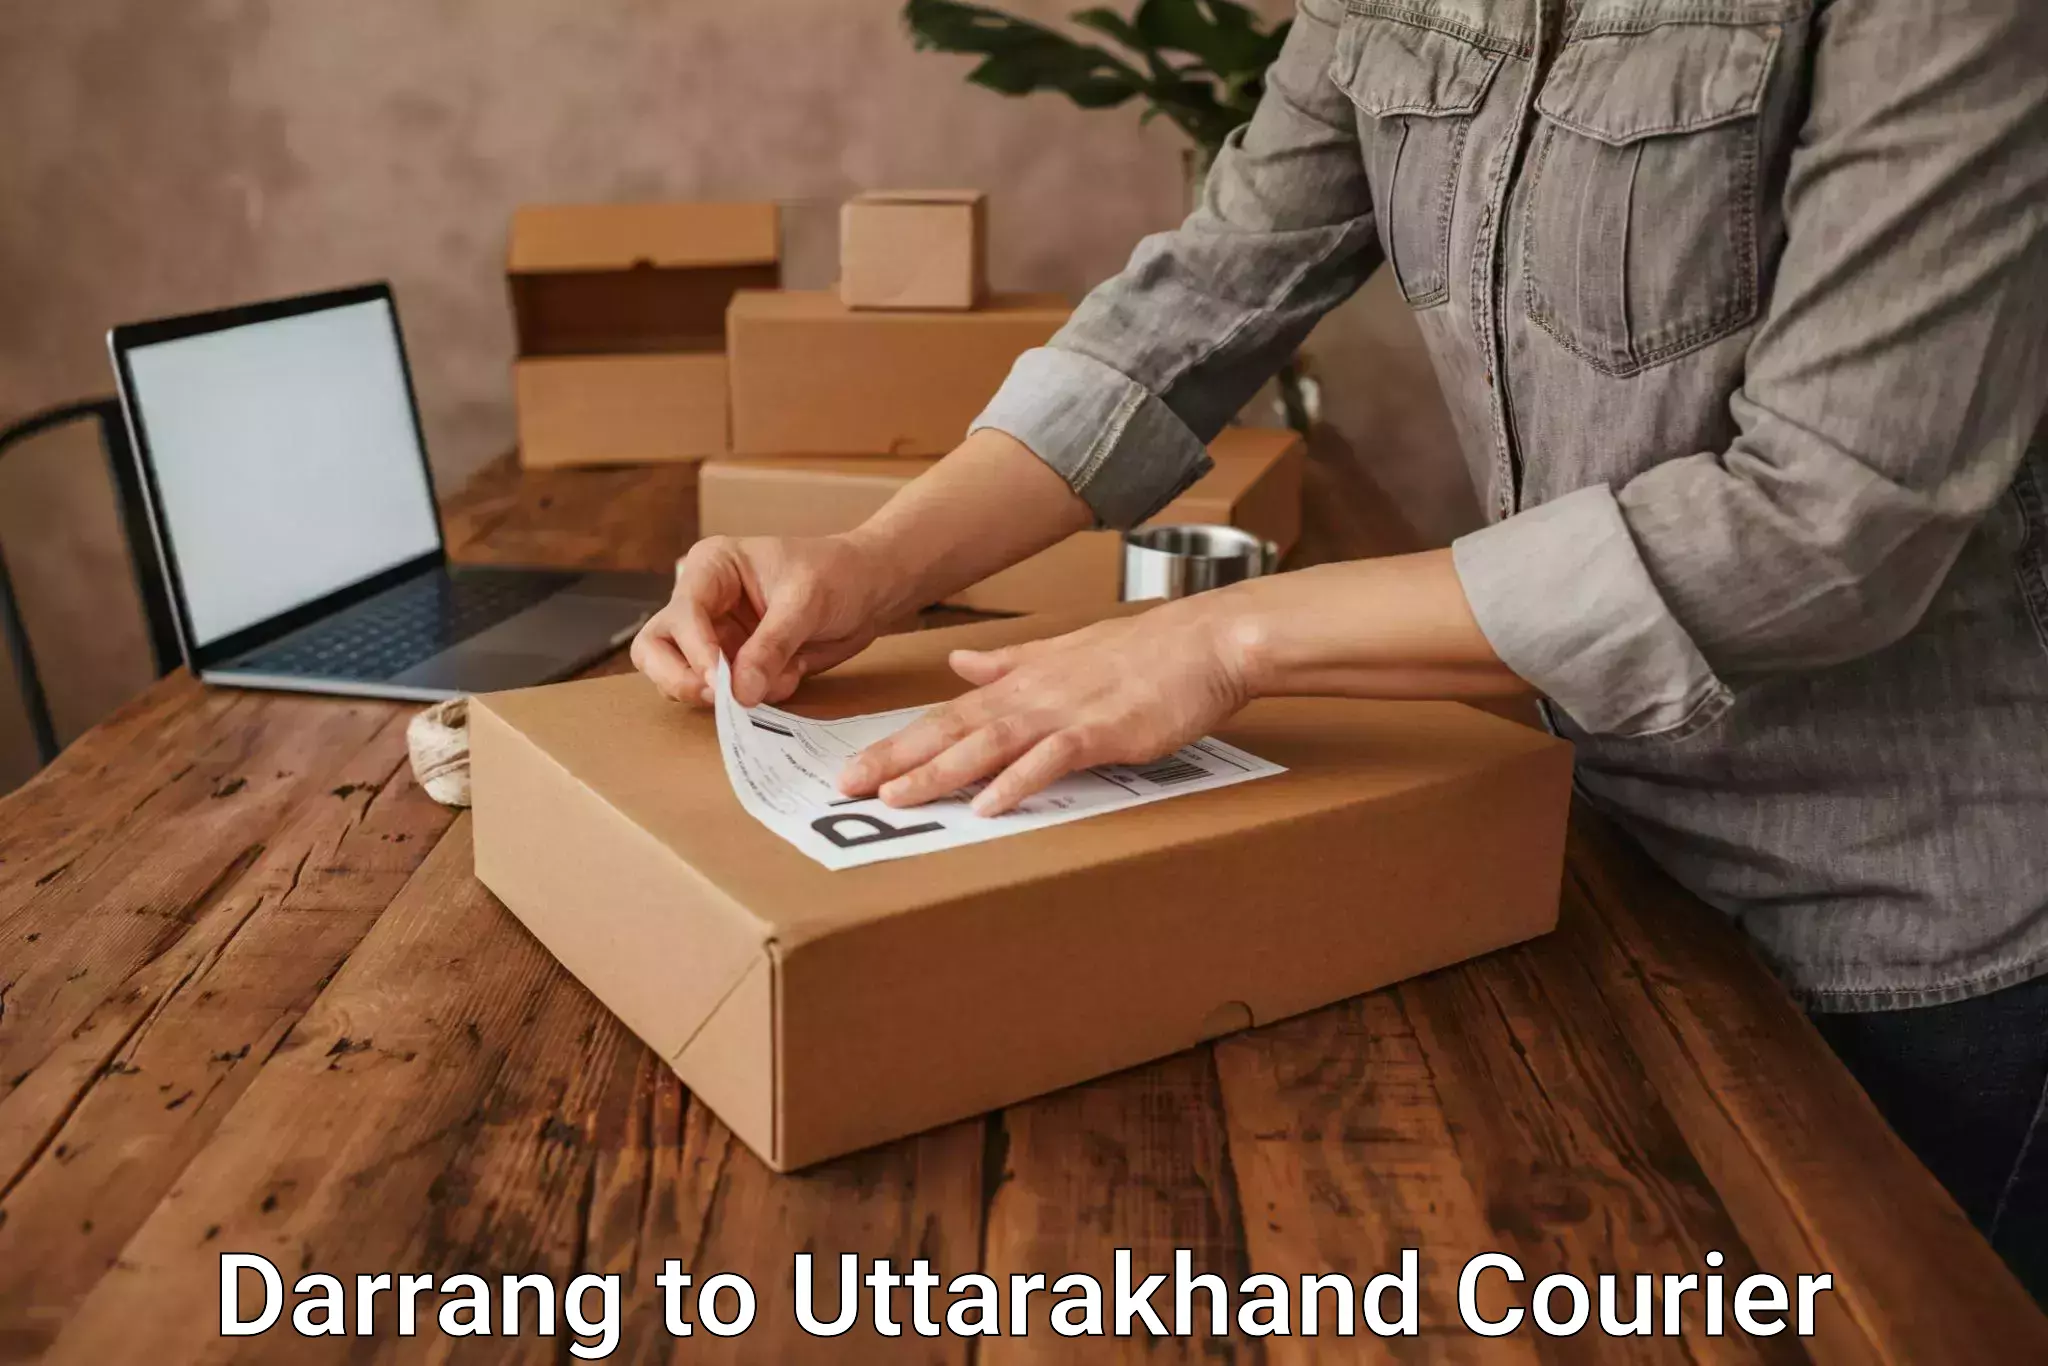 Automated parcel services Darrang to Roorkee